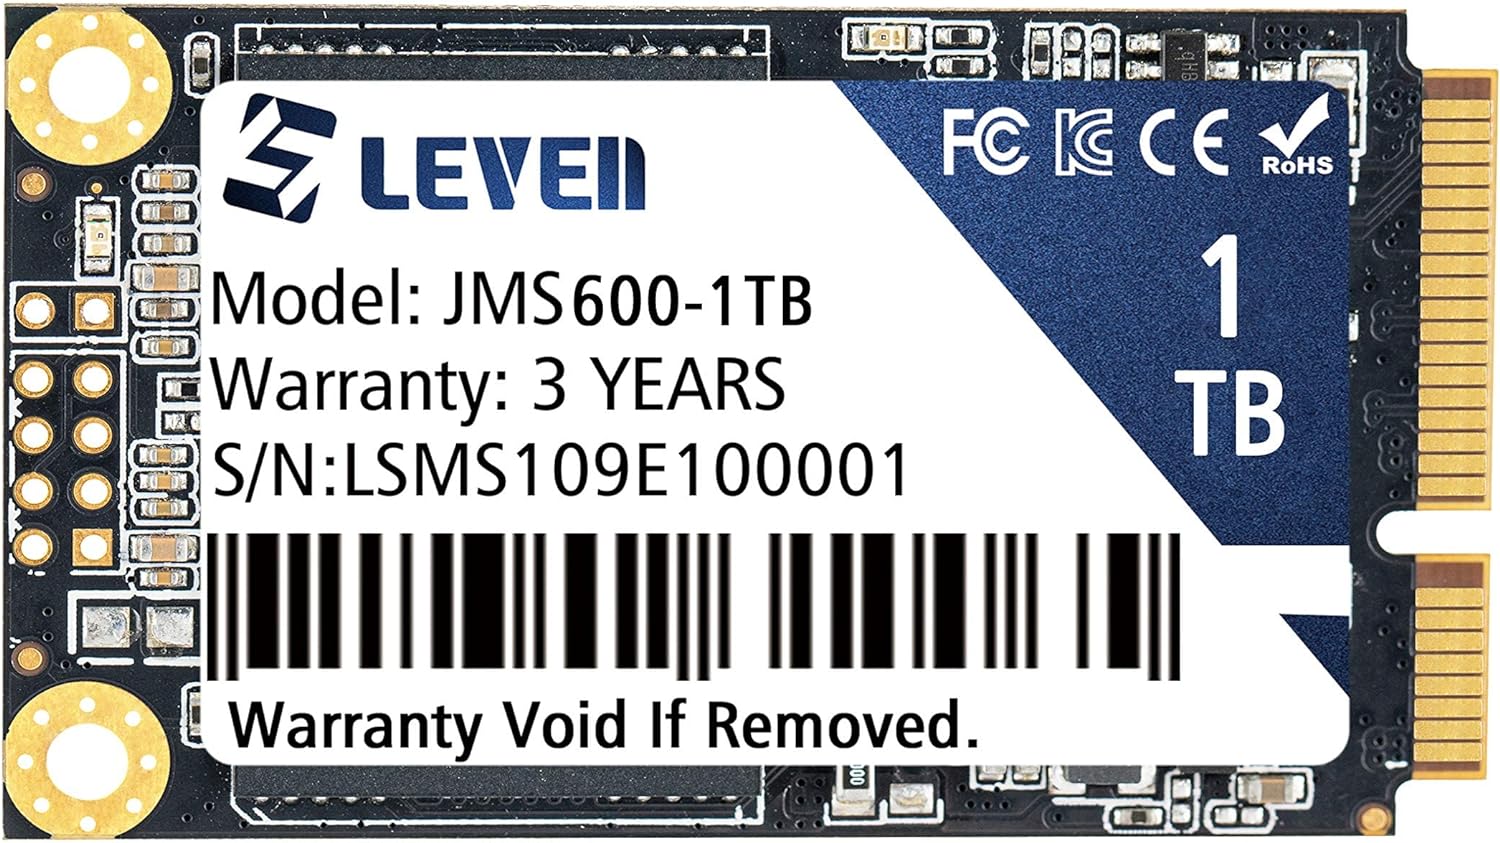 LEVEN JPS800 2TB PCIe Gen4 Speed up to 5,000MB/s, 3D NAND NVMe M.2 SSD with Thermal Pad and Heat Sink